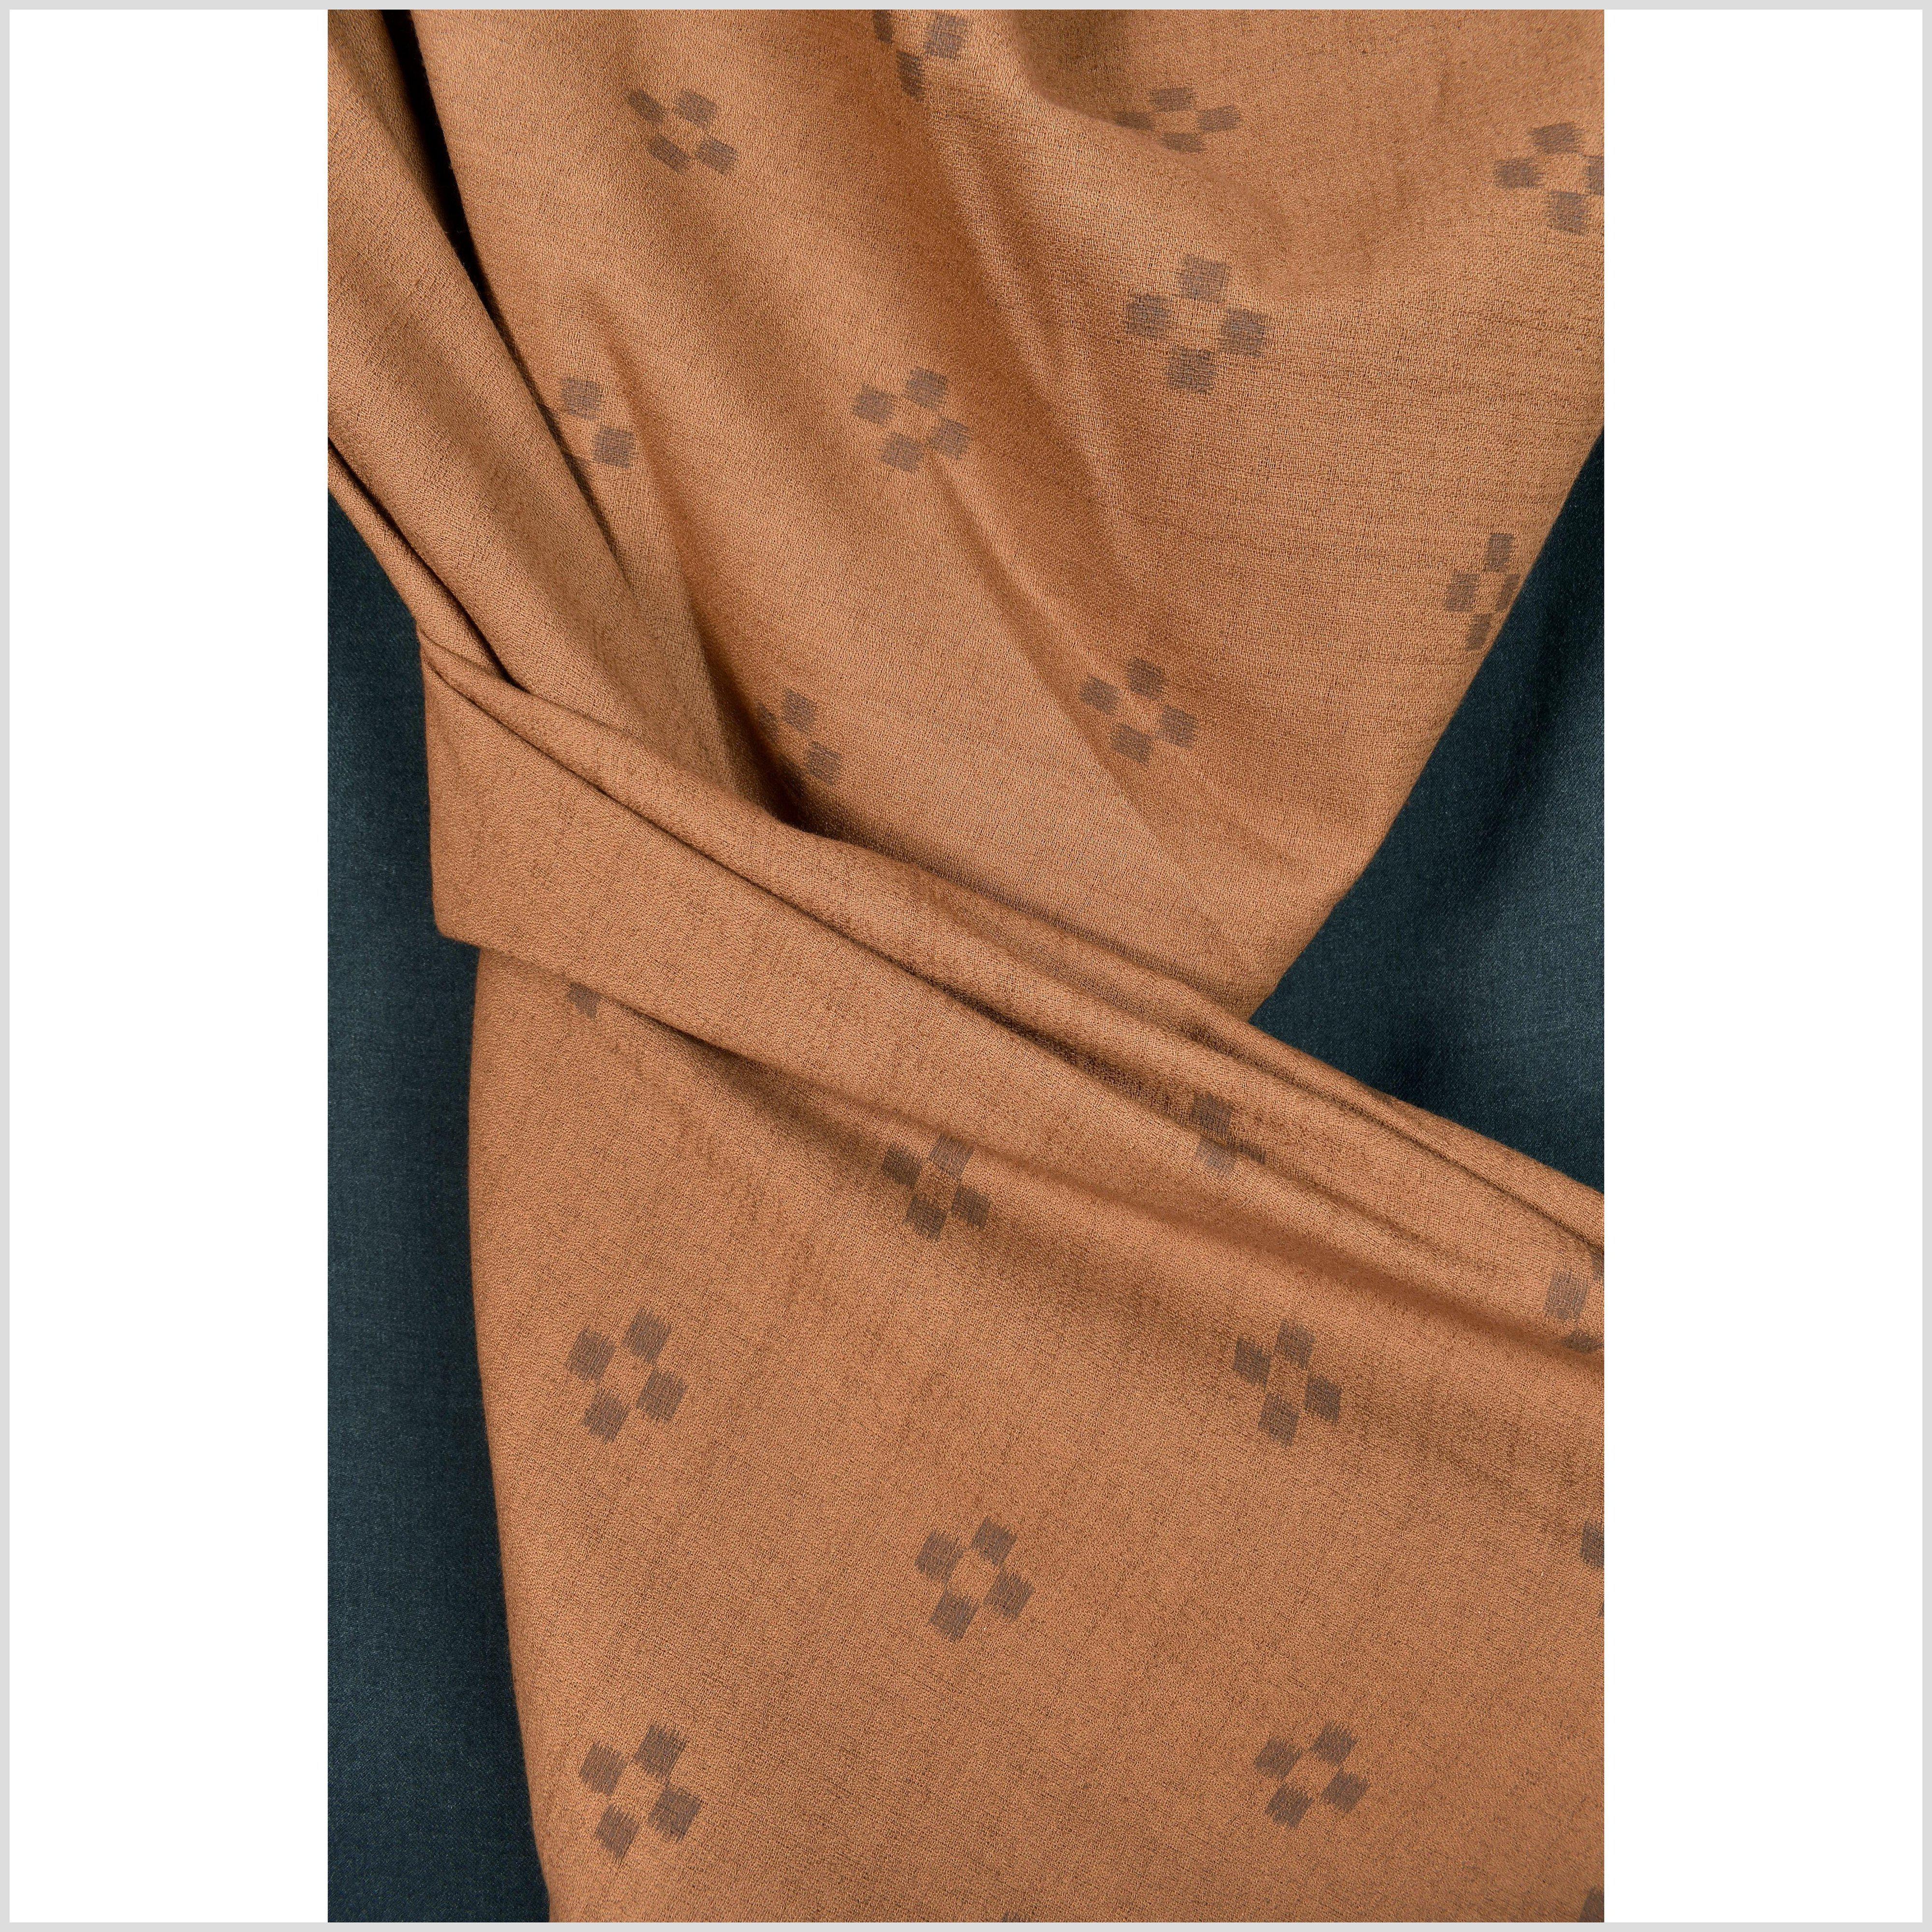 Textured woven cotton fabric, tobacco, warm rust color, brown